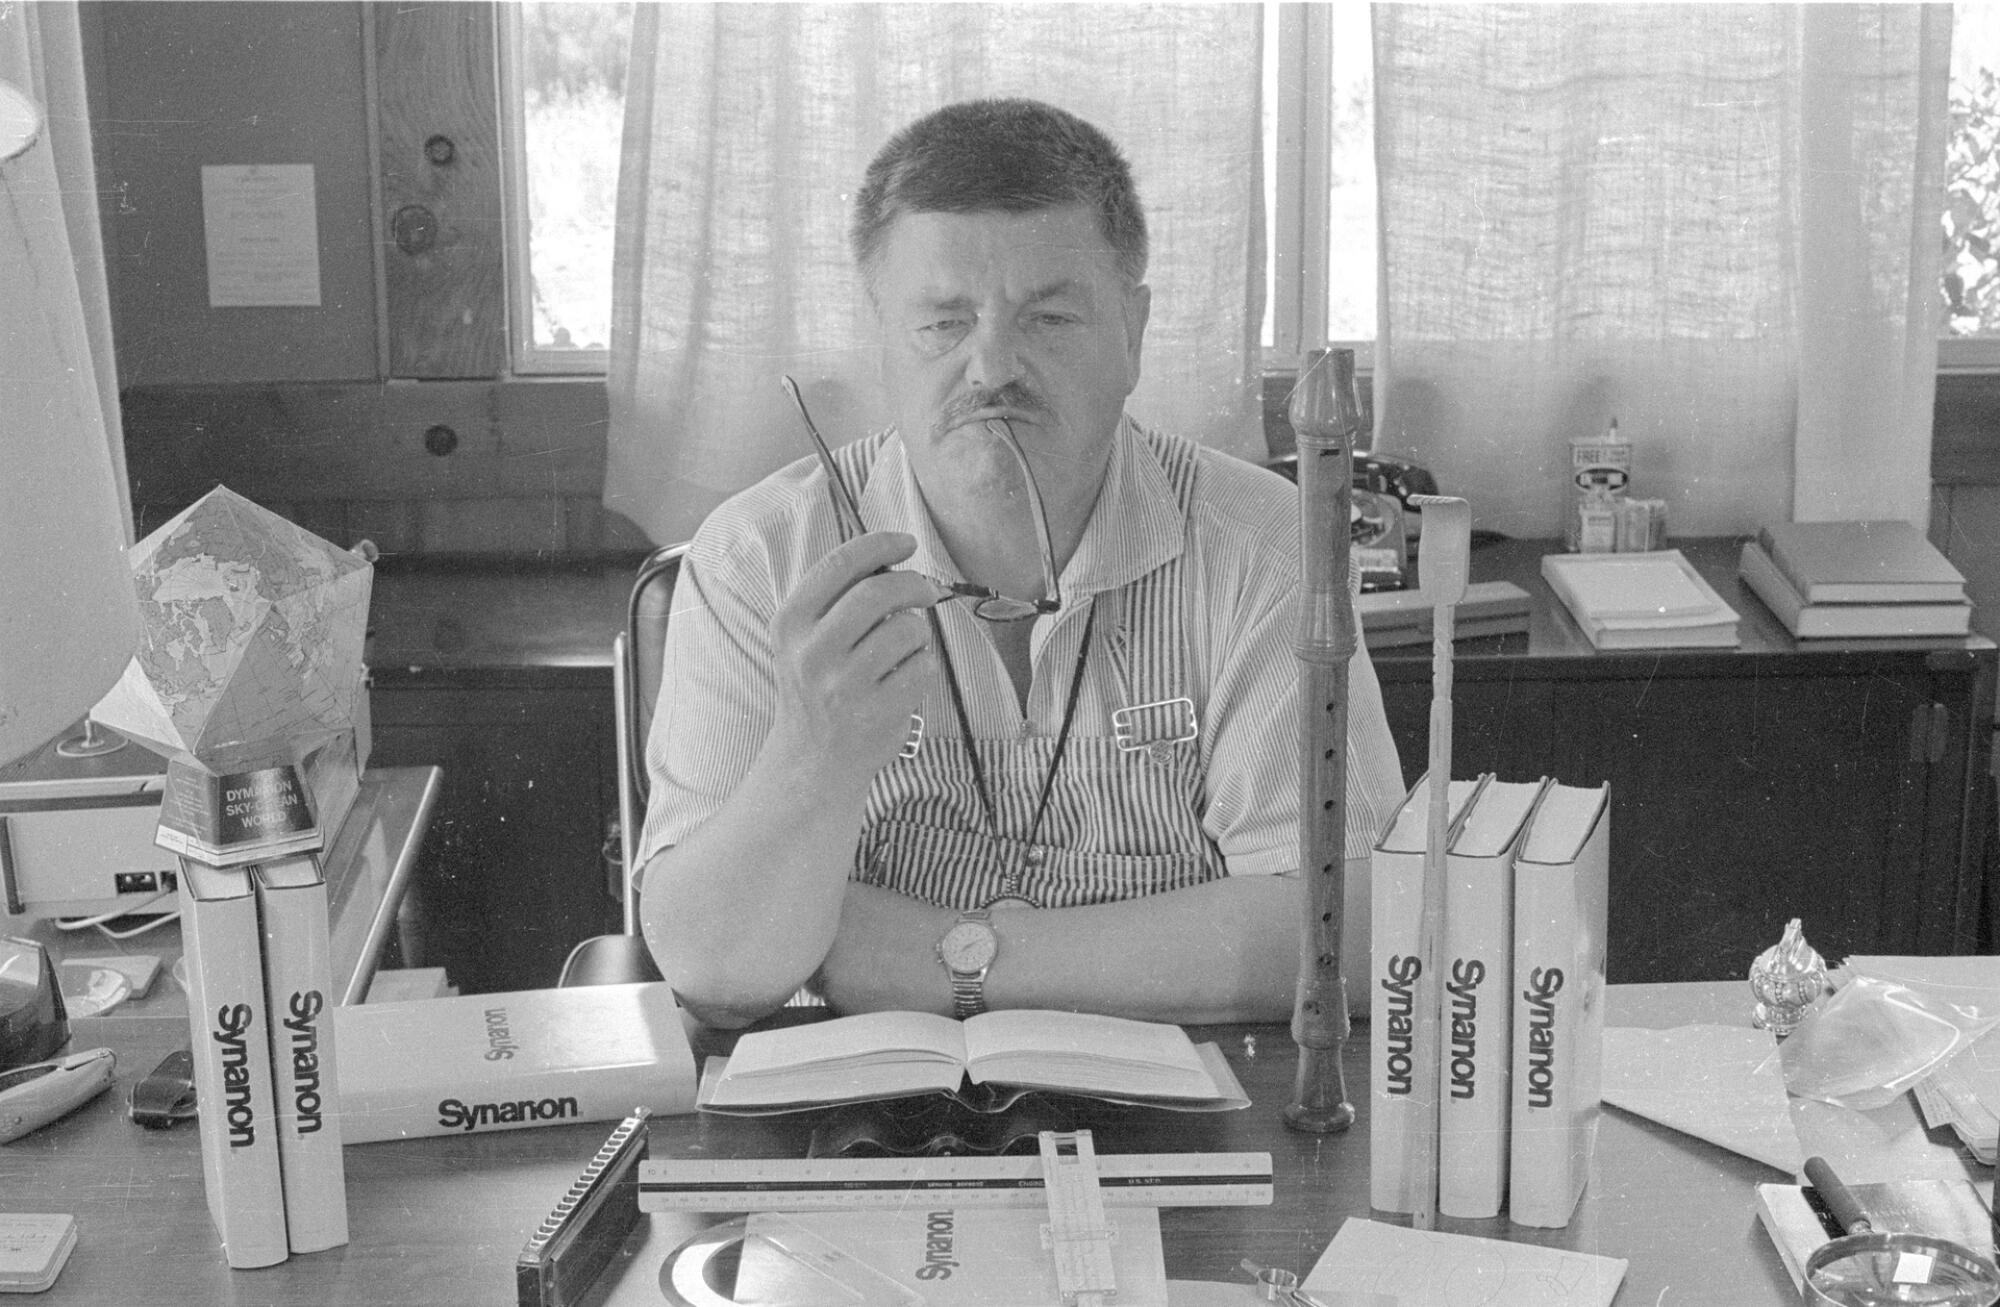 A man seated at a desk holding a pair of glasses.